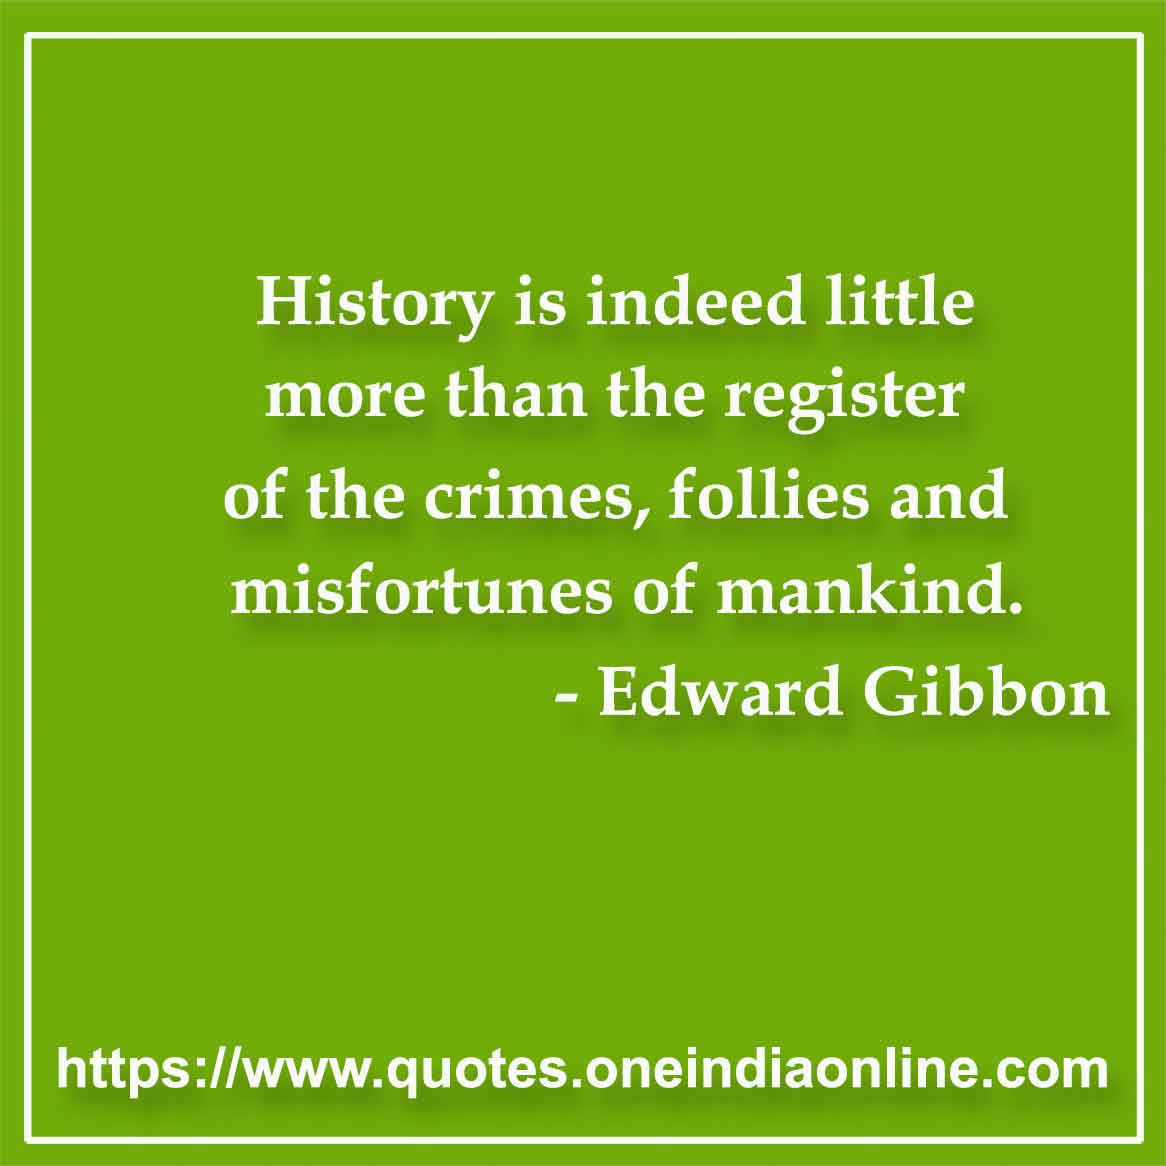 History is indeed little more than the register of the crimes, follies and misfortunes of mankind.

- Crime Quotes by Edward Gibbon